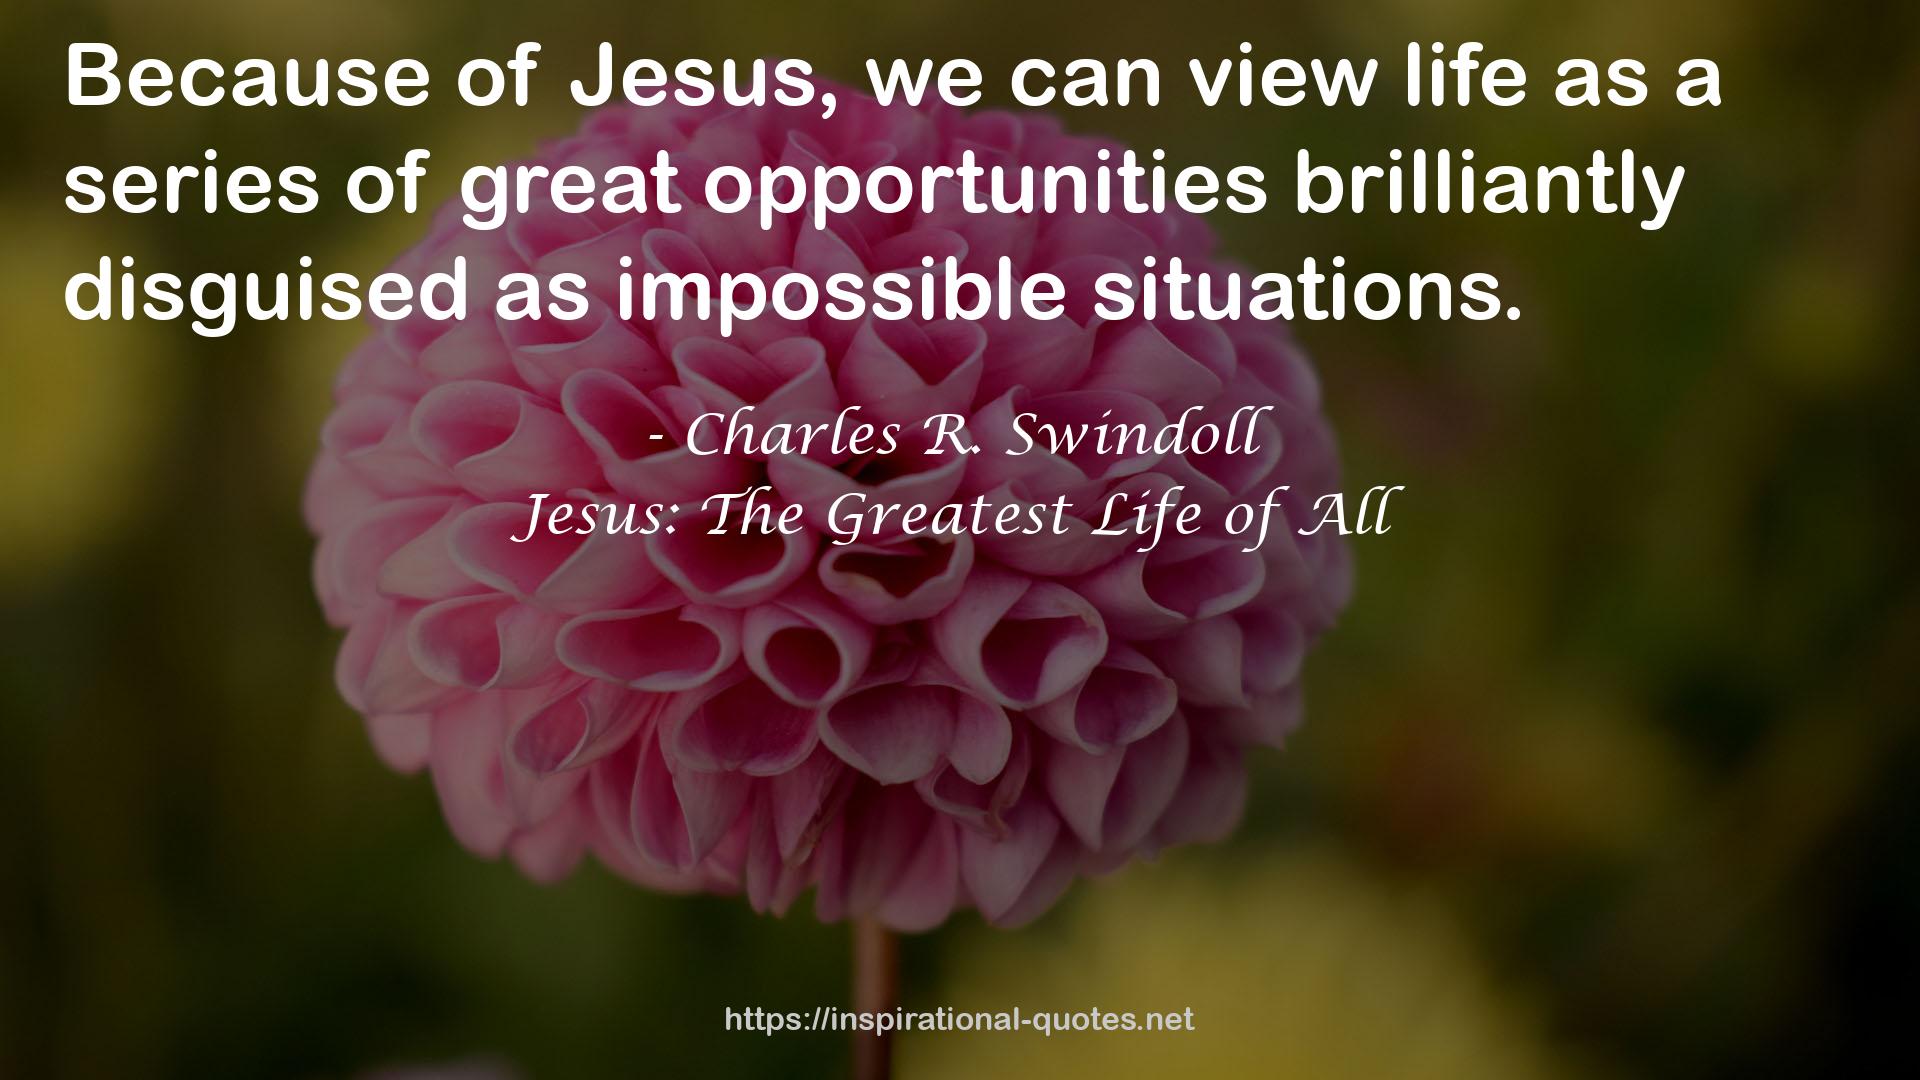 Jesus: The Greatest Life of All QUOTES